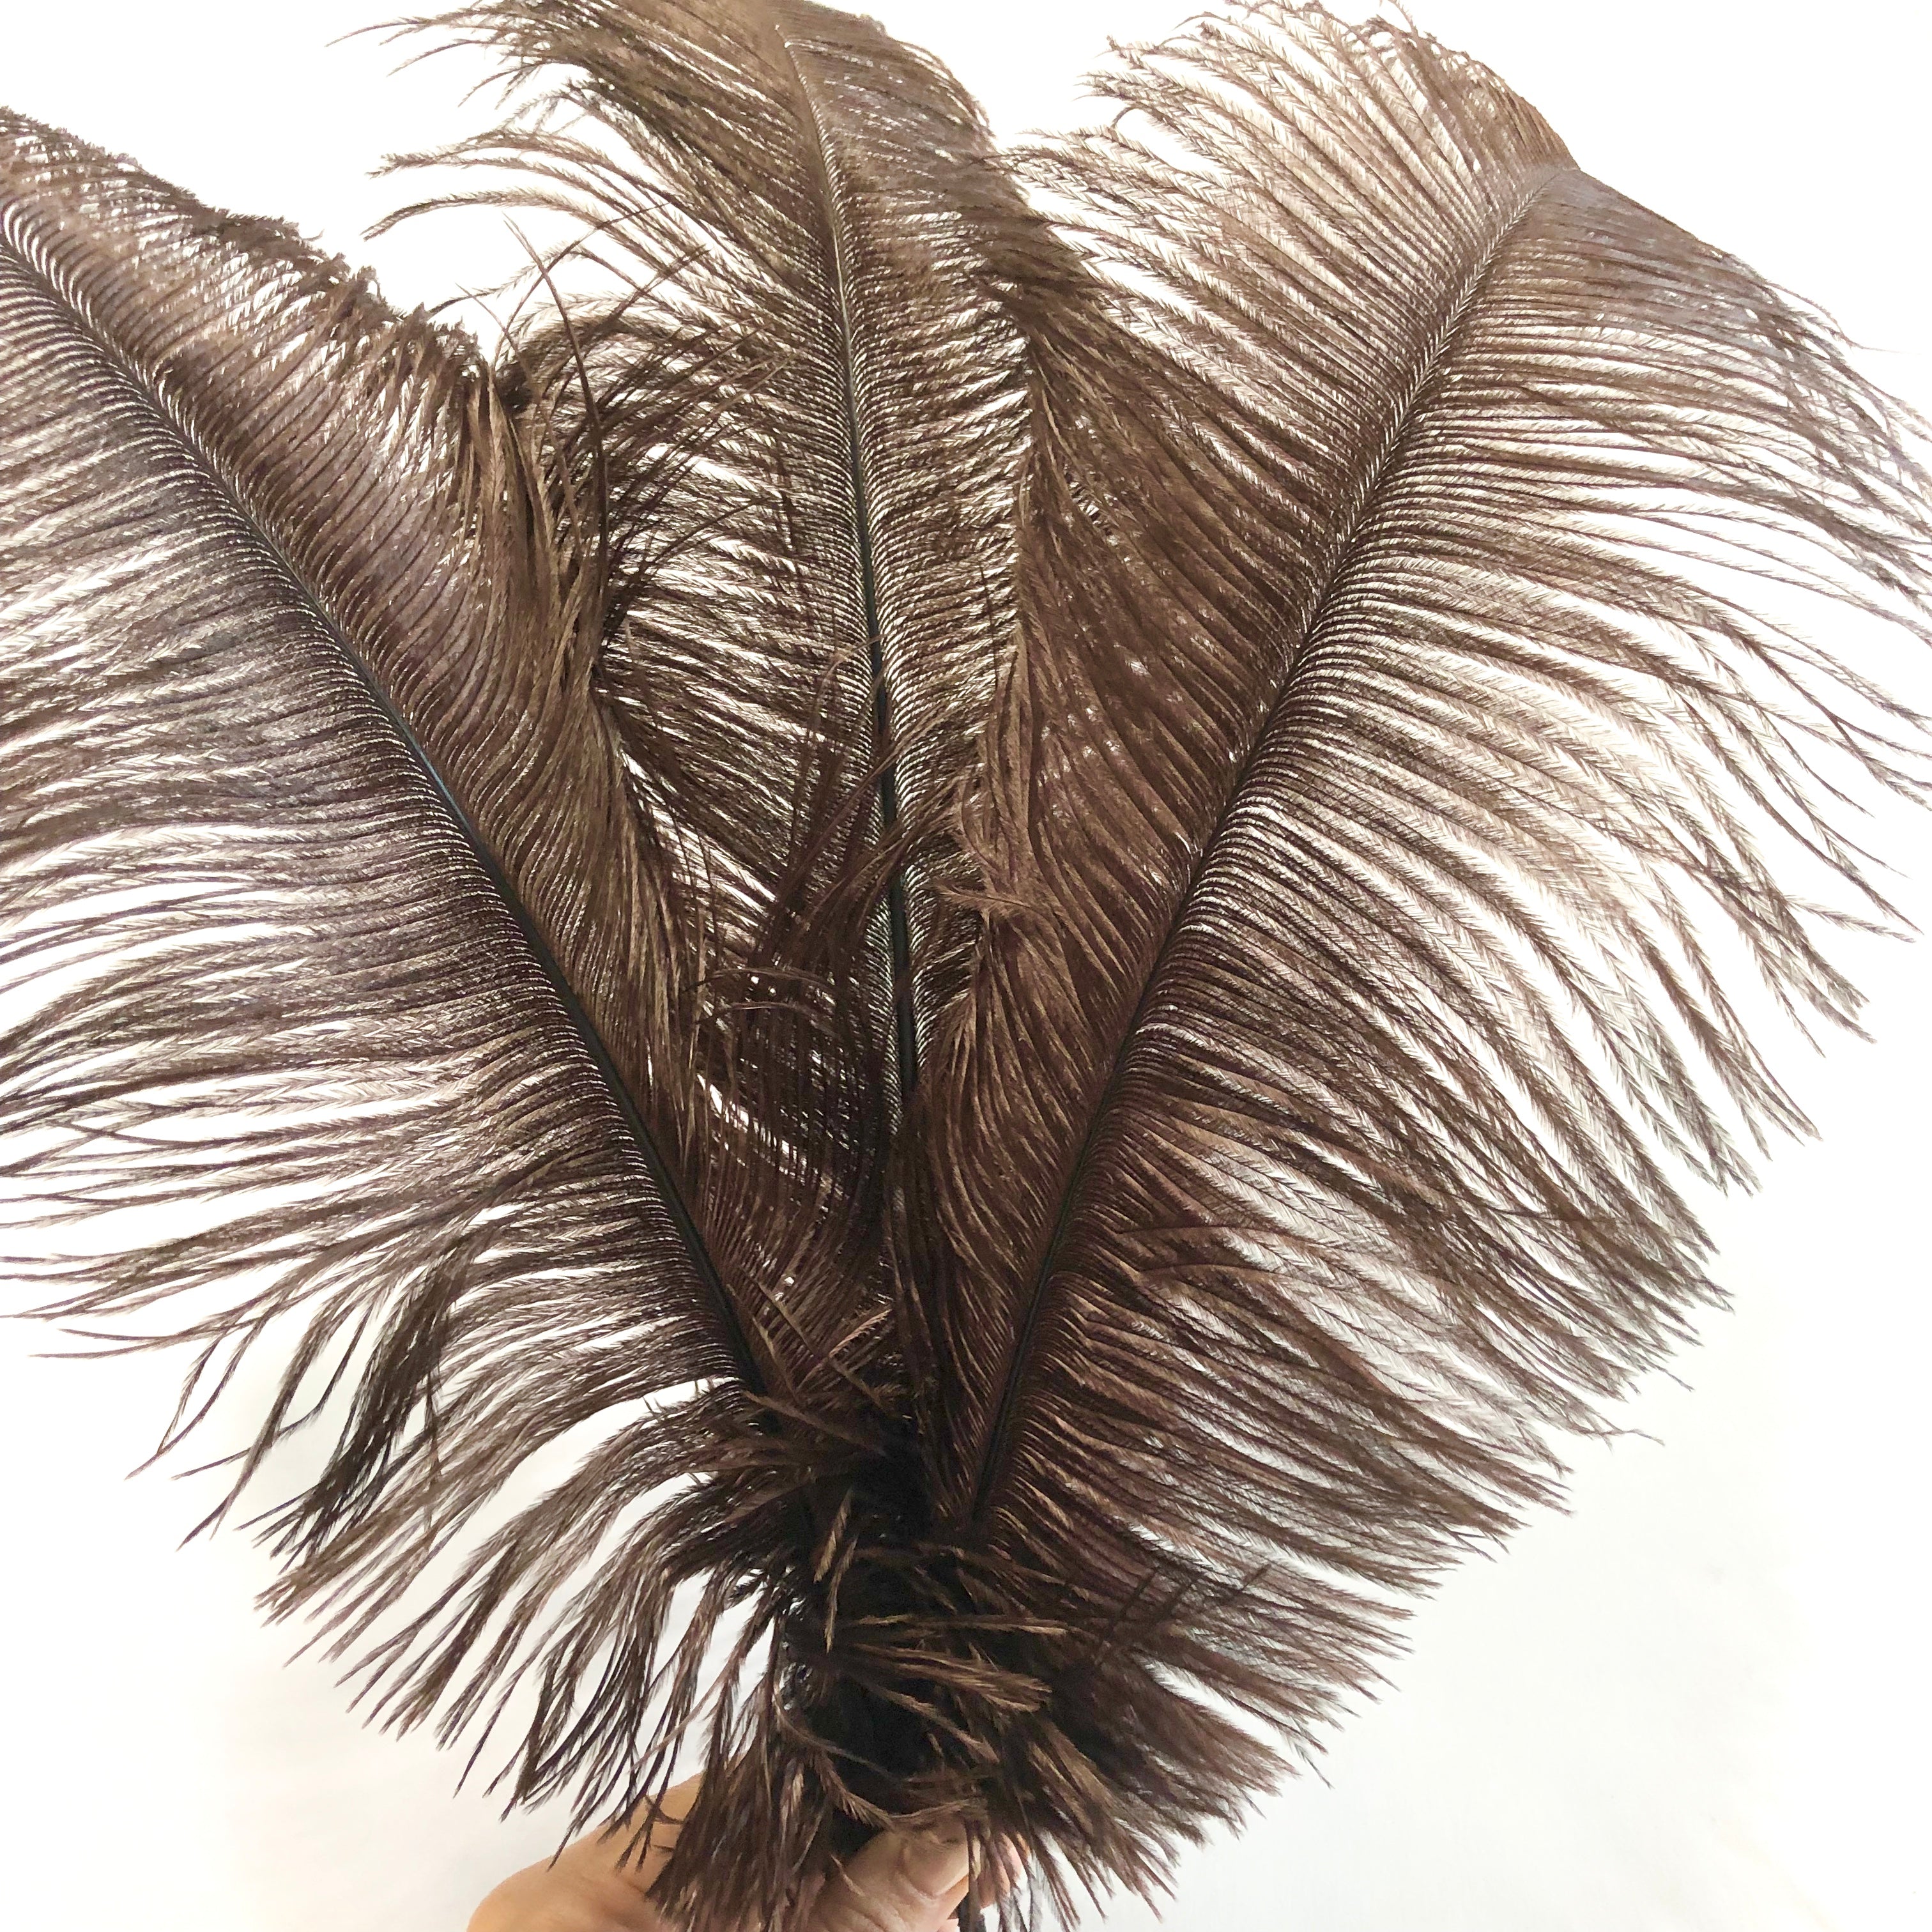 Ostrich Drab Feather 27-32cm - Chocolate Brown